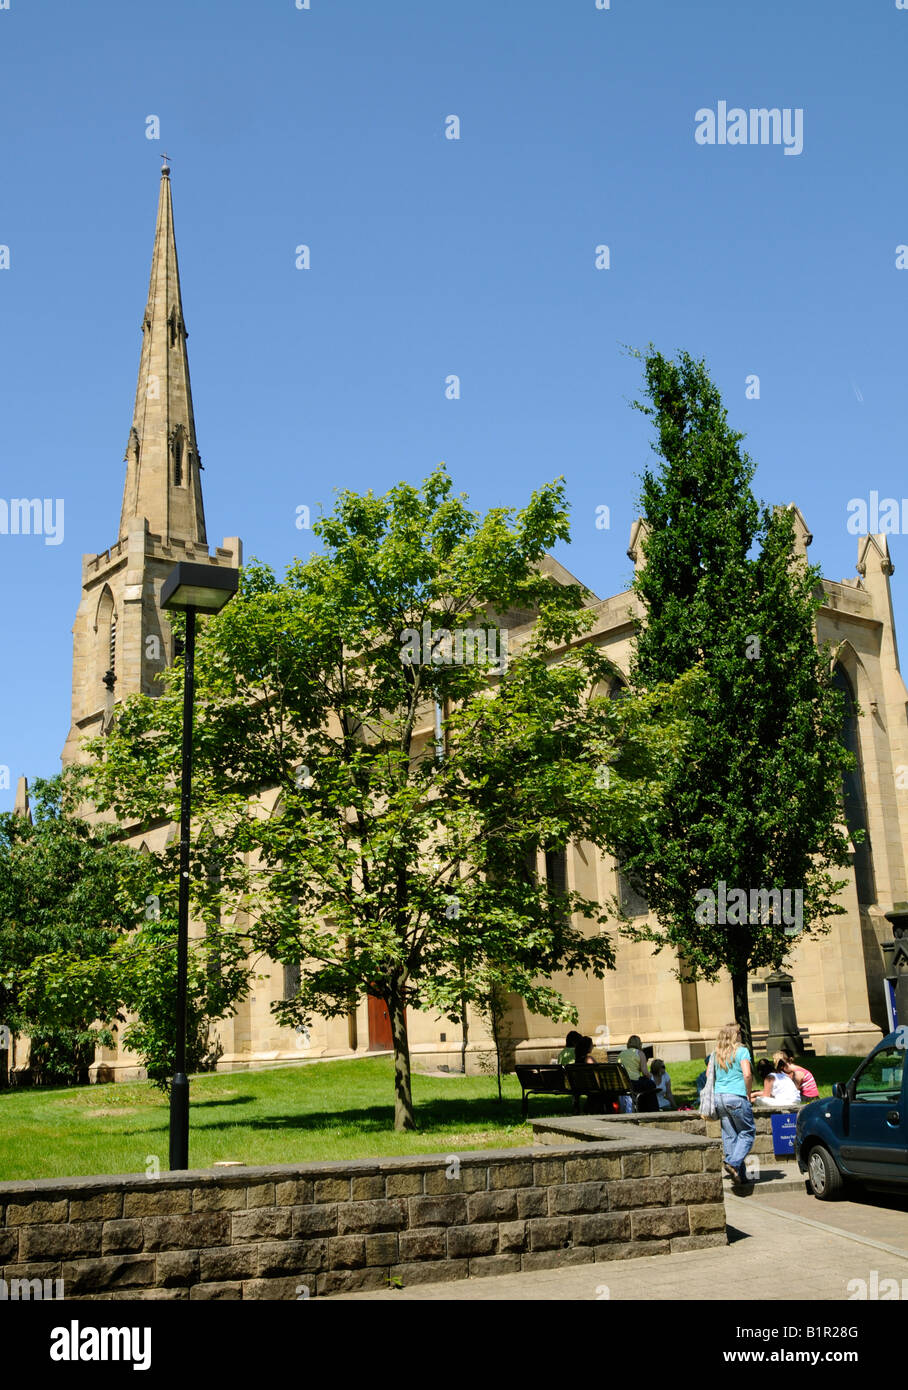 The university church on the Huddersfield university campus with students relaxing in the foreground Stock Photo